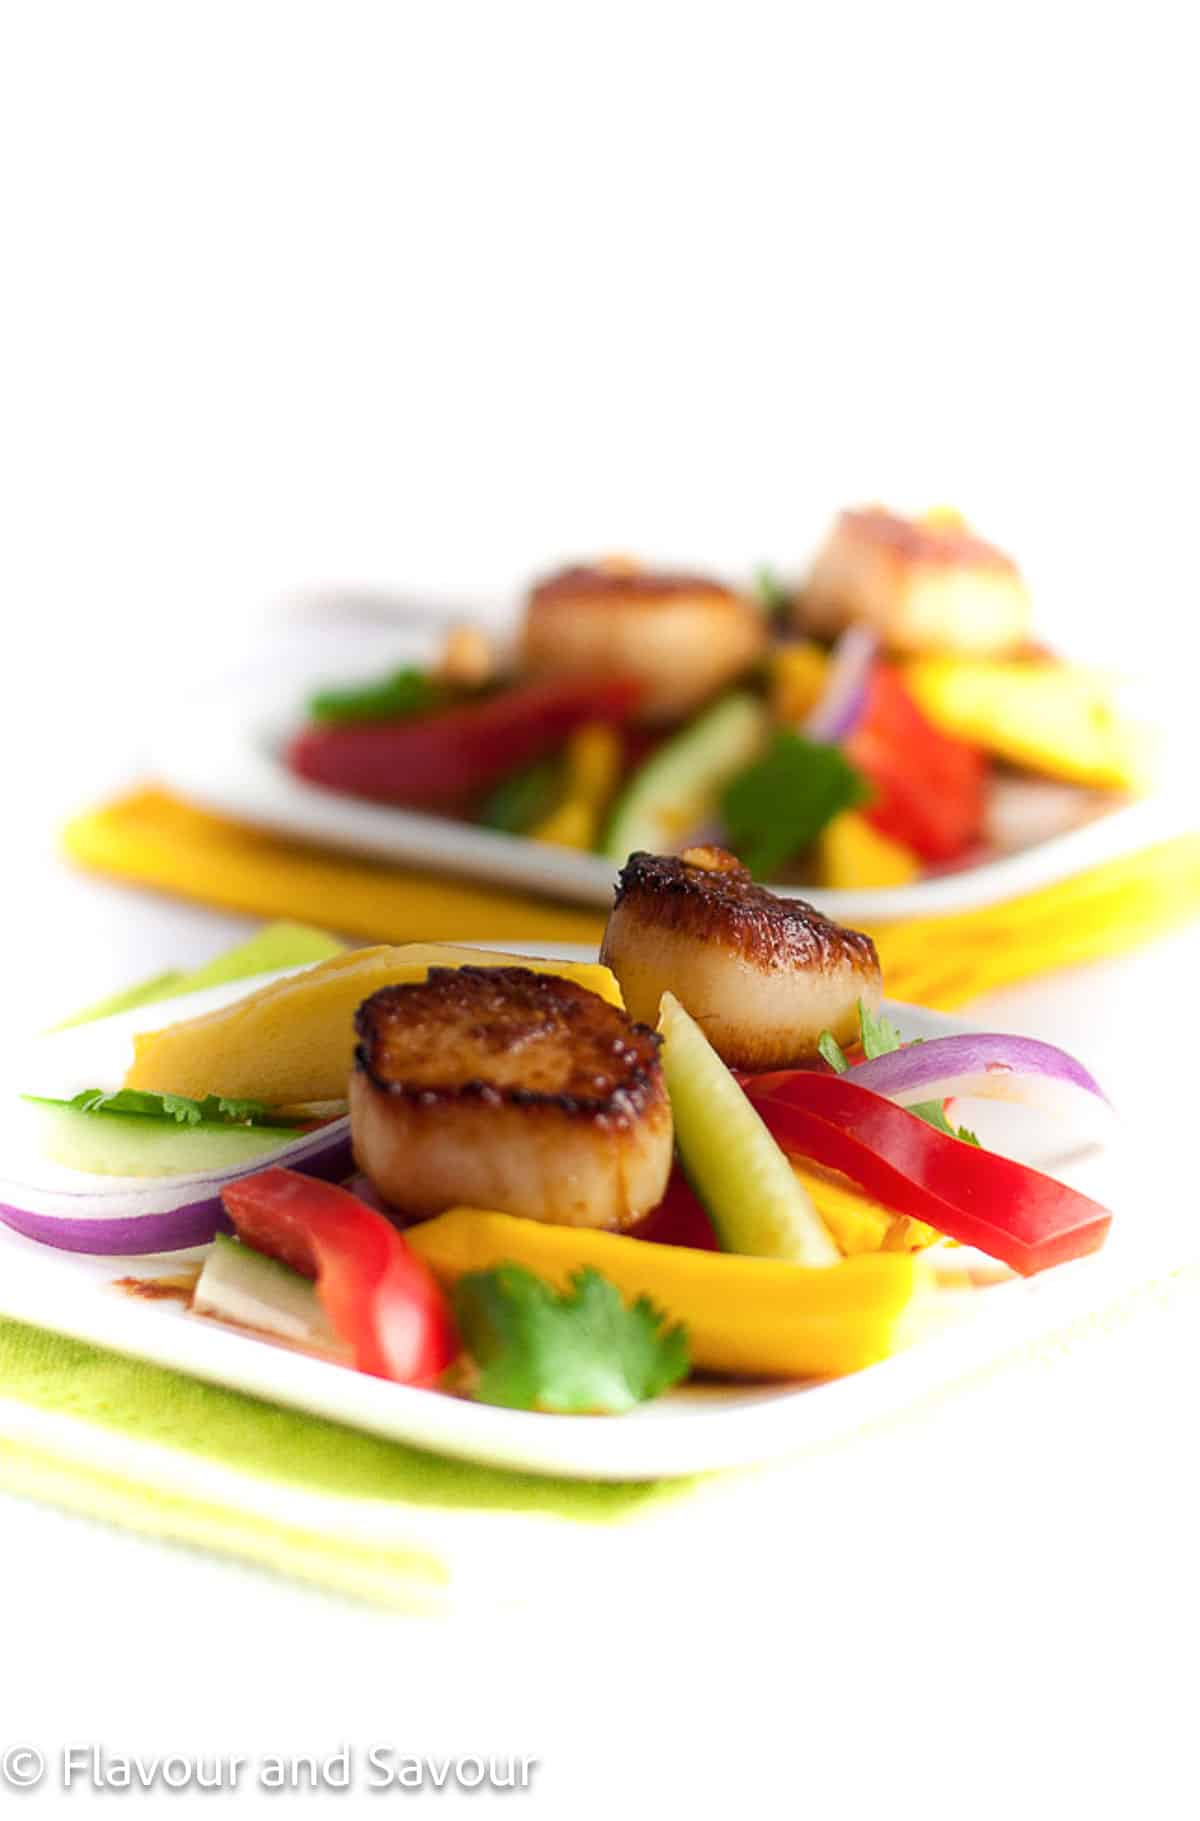 Two plates with seared scallops on a mango salad.